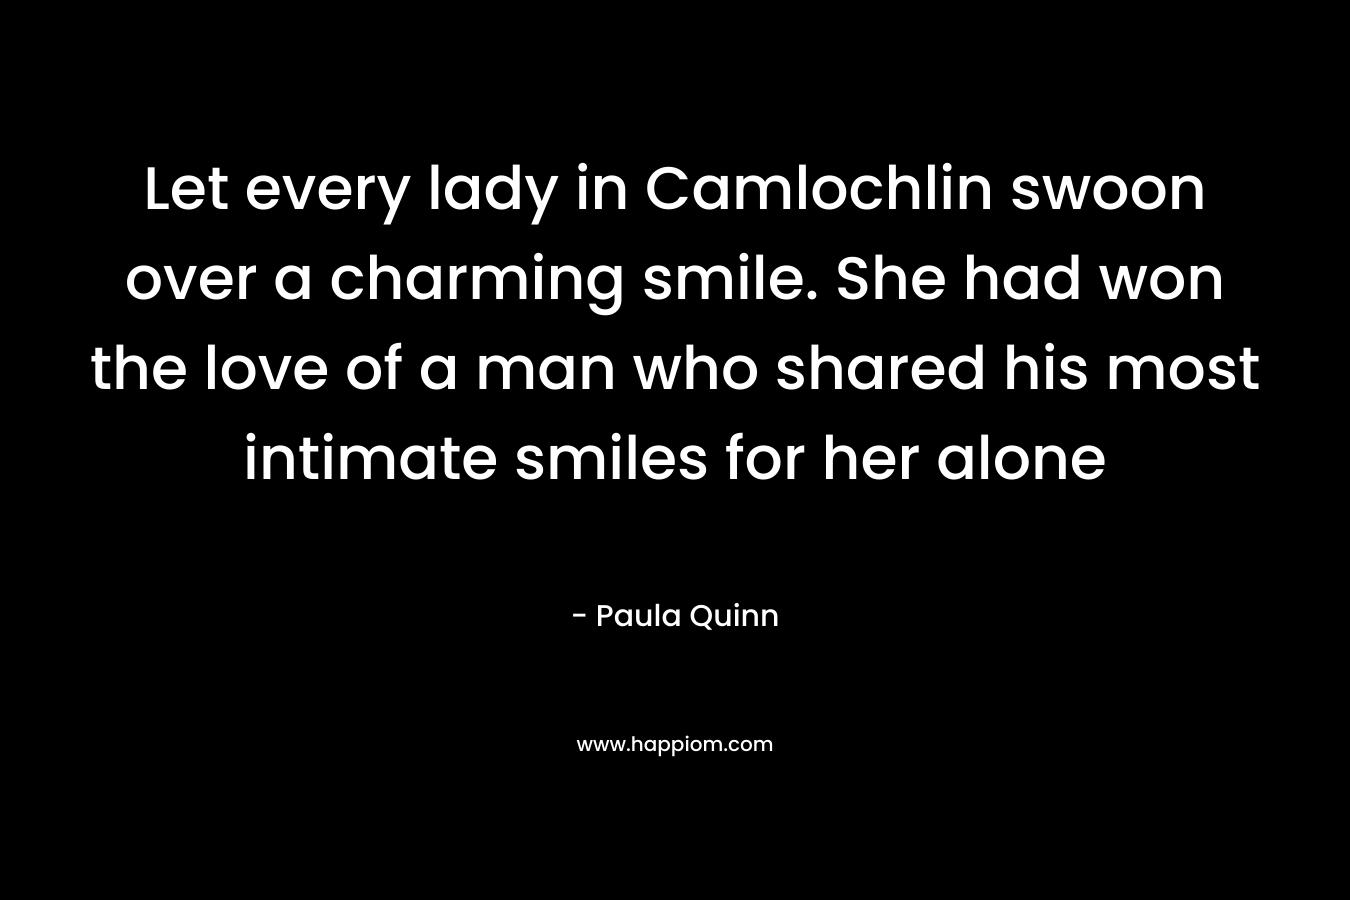 Let every lady in Camlochlin swoon over a charming smile. She had won the love of a man who shared his most intimate smiles for her alone – Paula Quinn